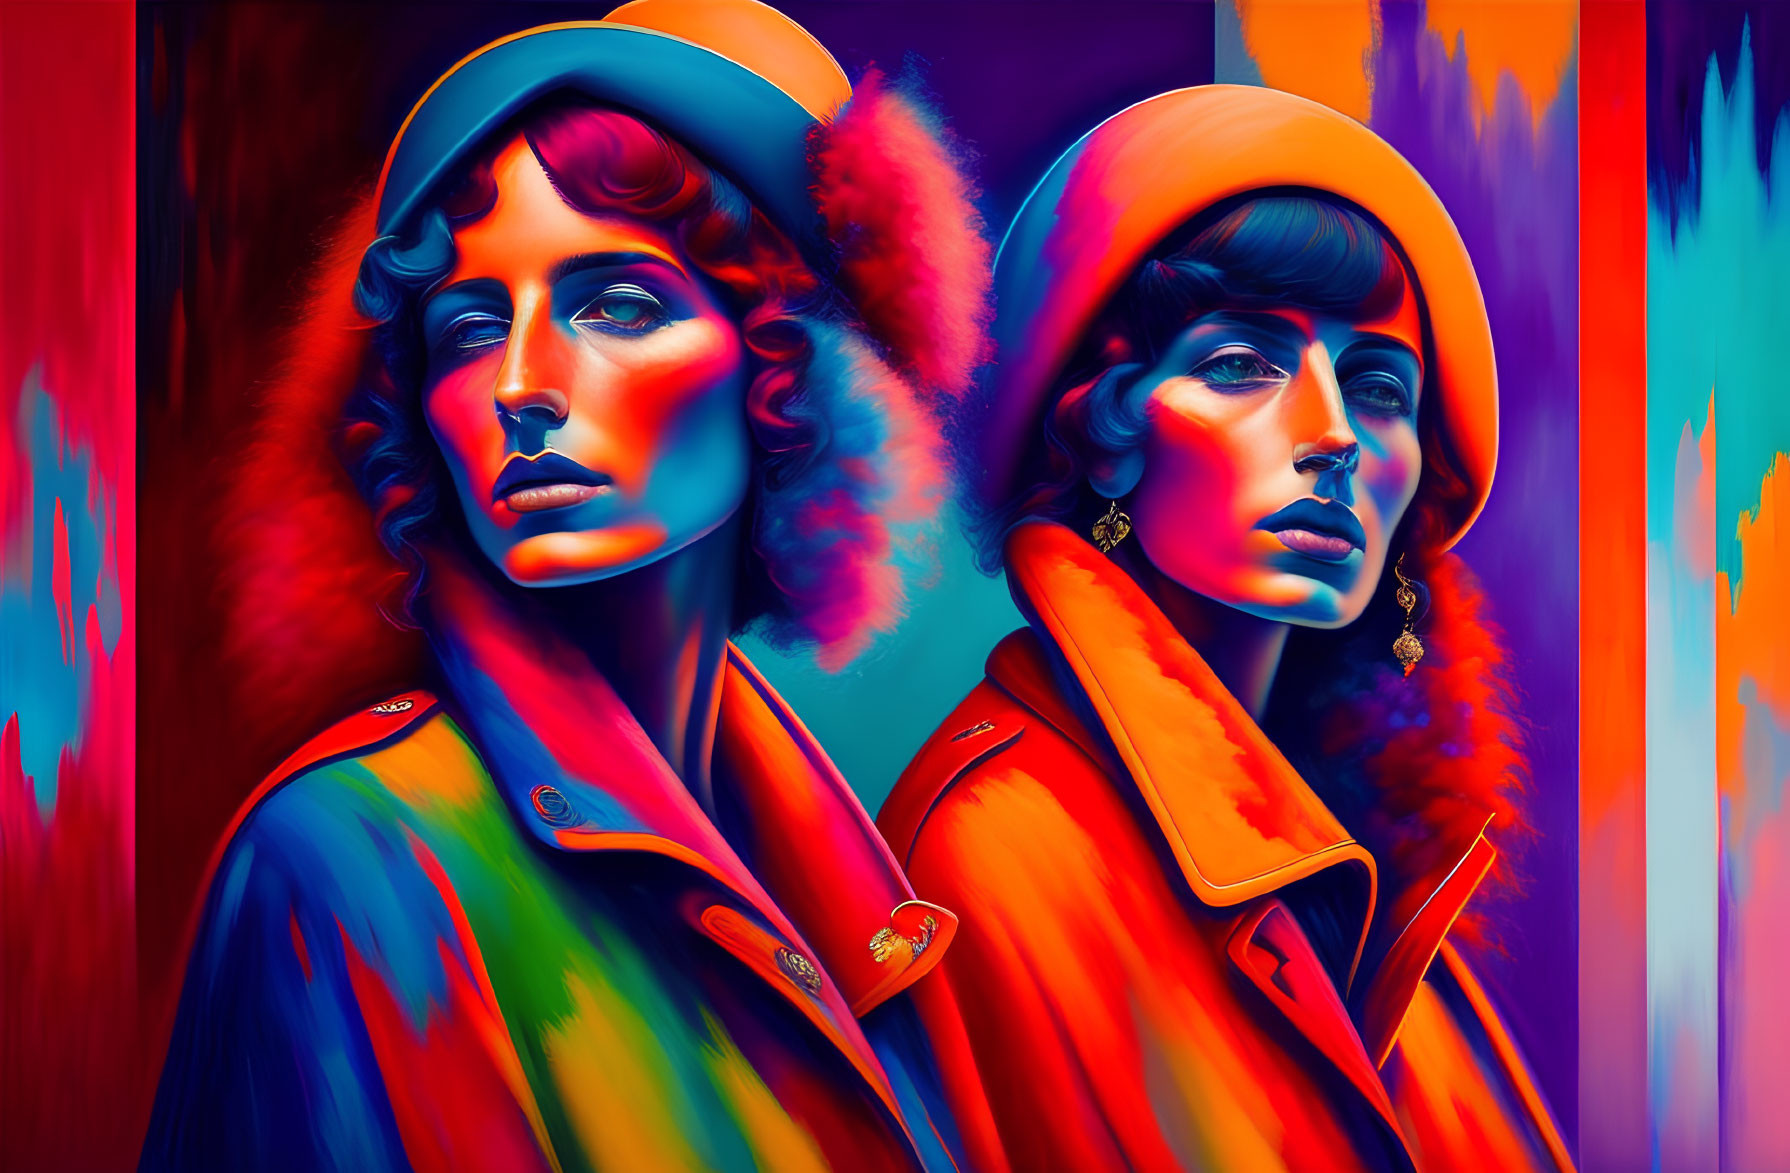 Abstract digital artwork of two female figures in orange and blue attire on vibrant background